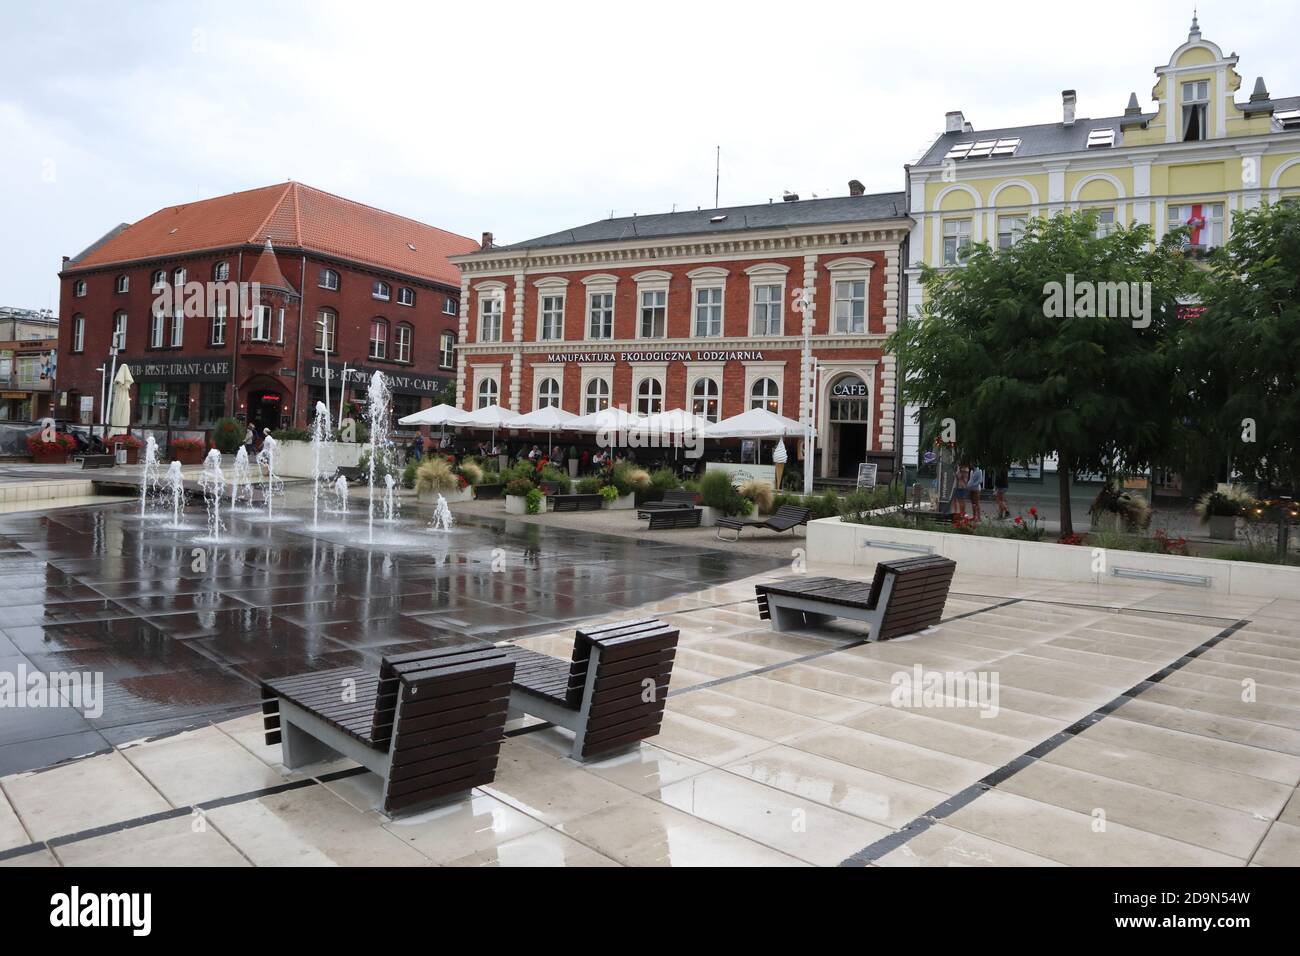 Swinemuende (Swinoujscie), / Poland - August 24 2020: In the center of town Swinemuende in Polang, fountain called: Fontanna miejska Stock Photo